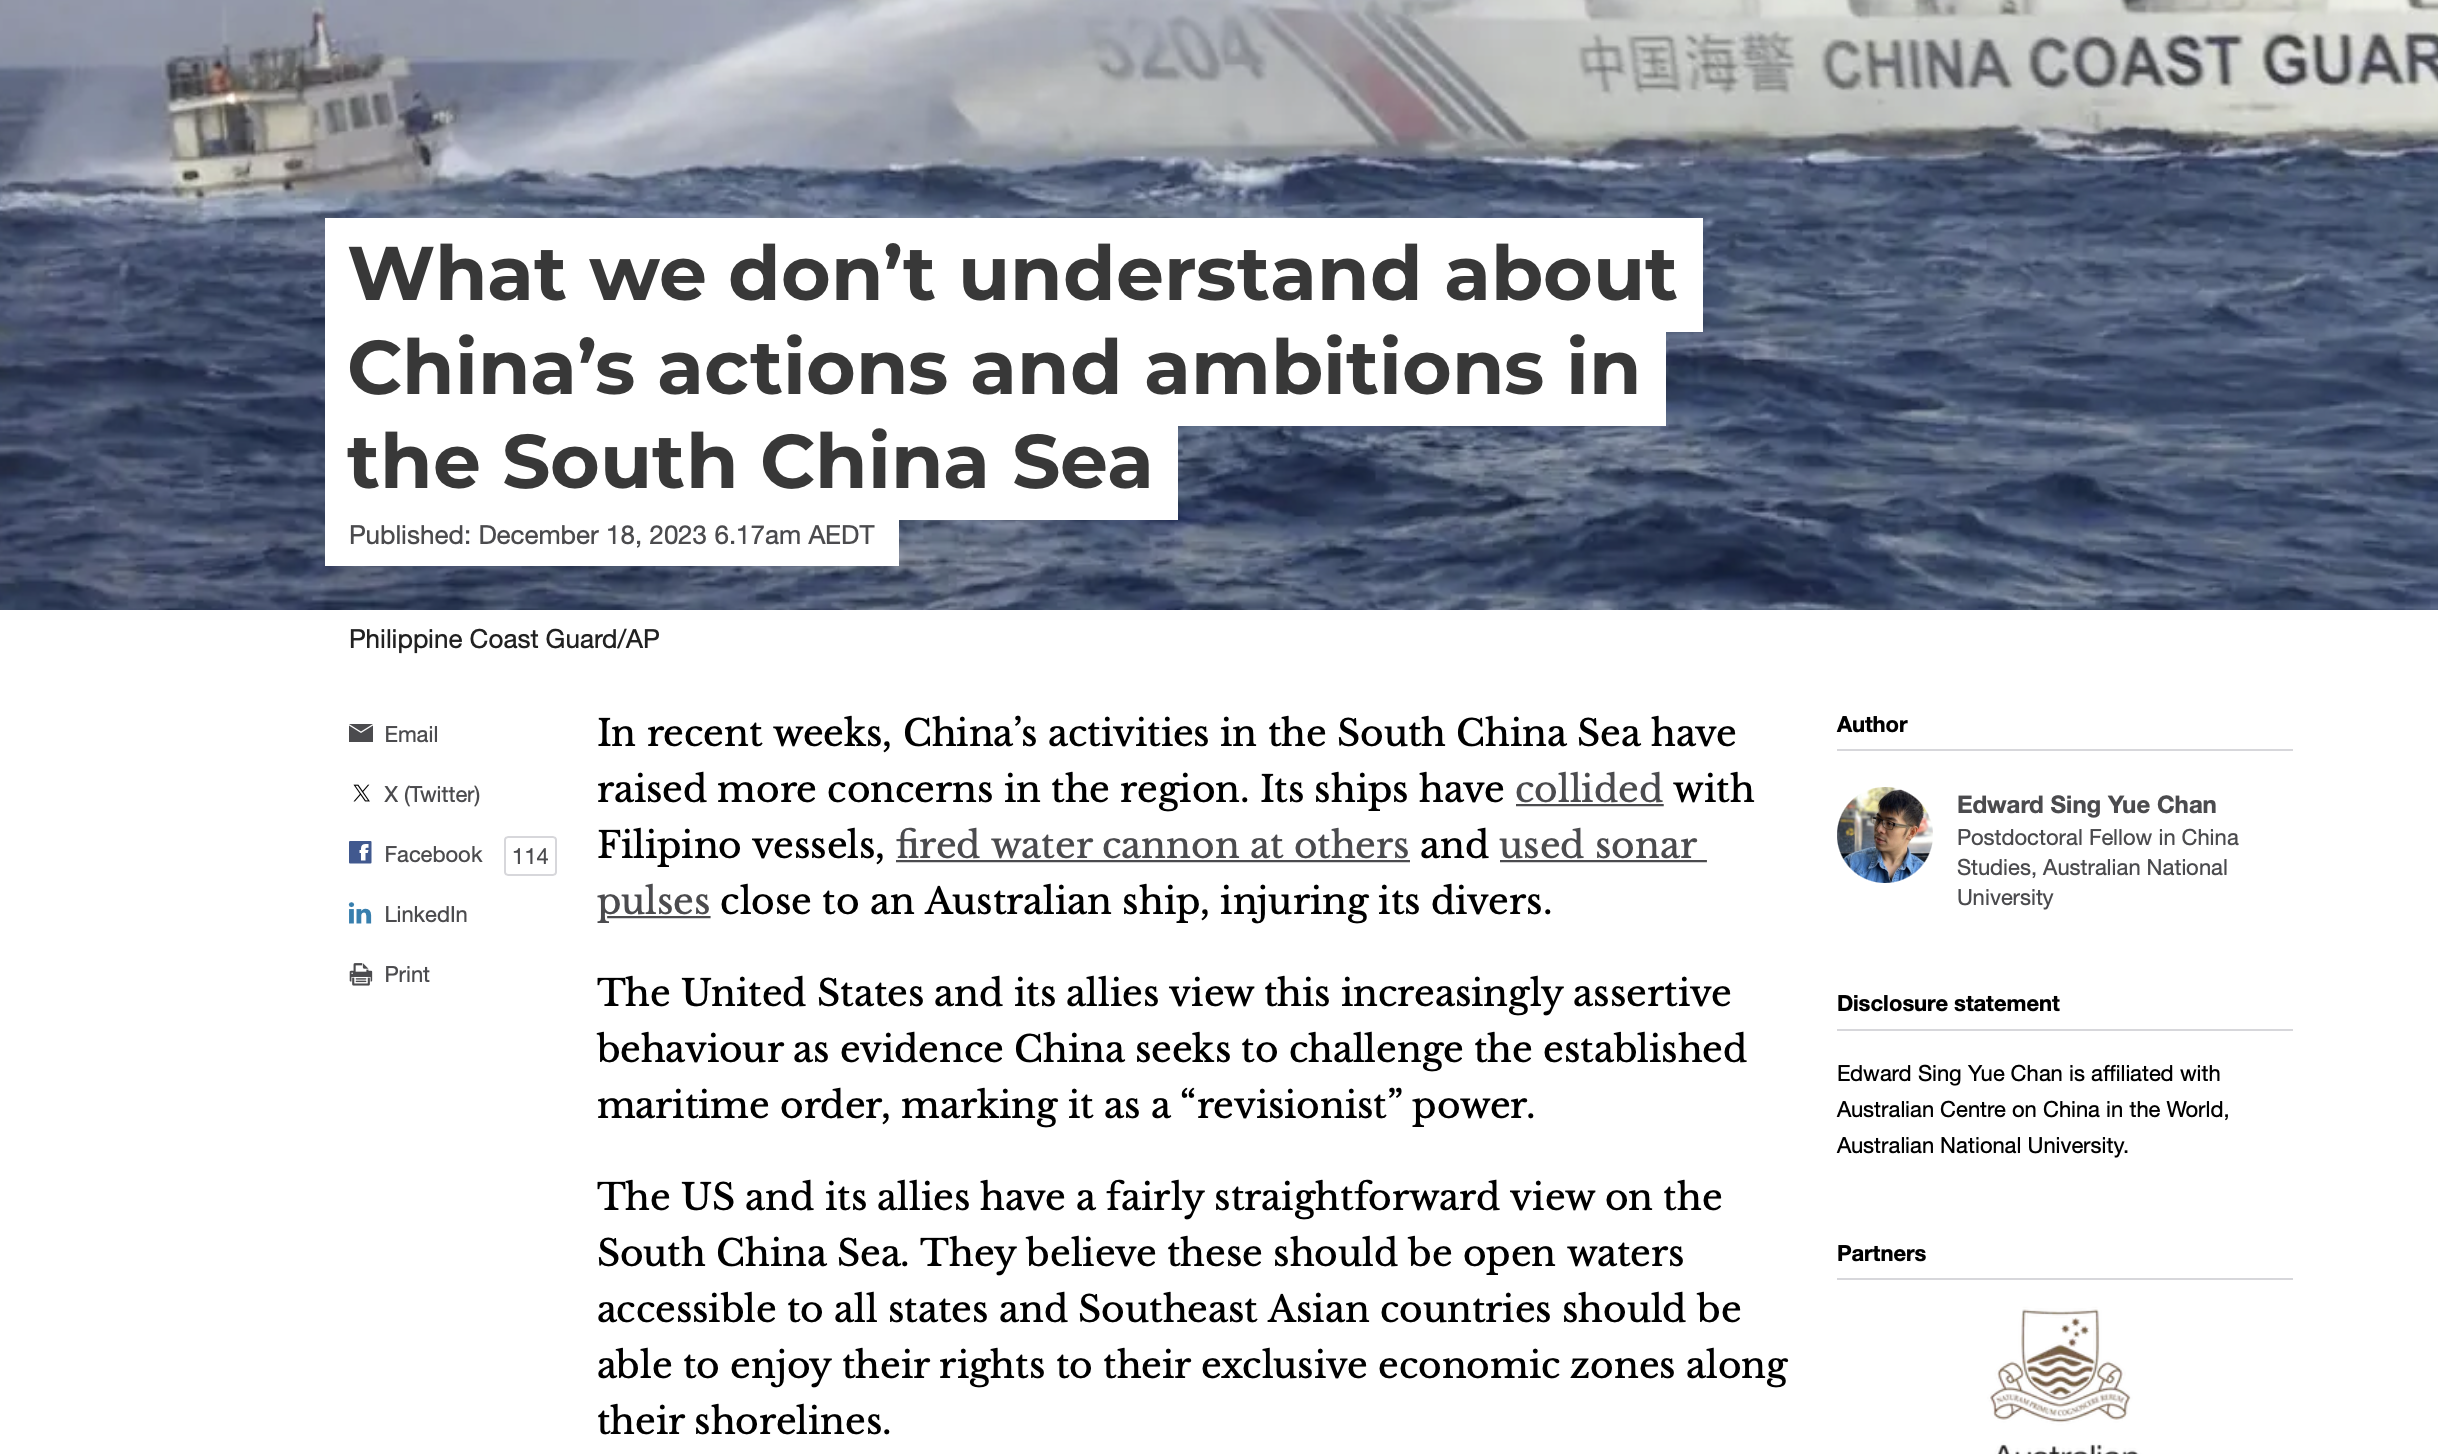 What we don’t understand about China’s actions and ambitions in the South China Sea